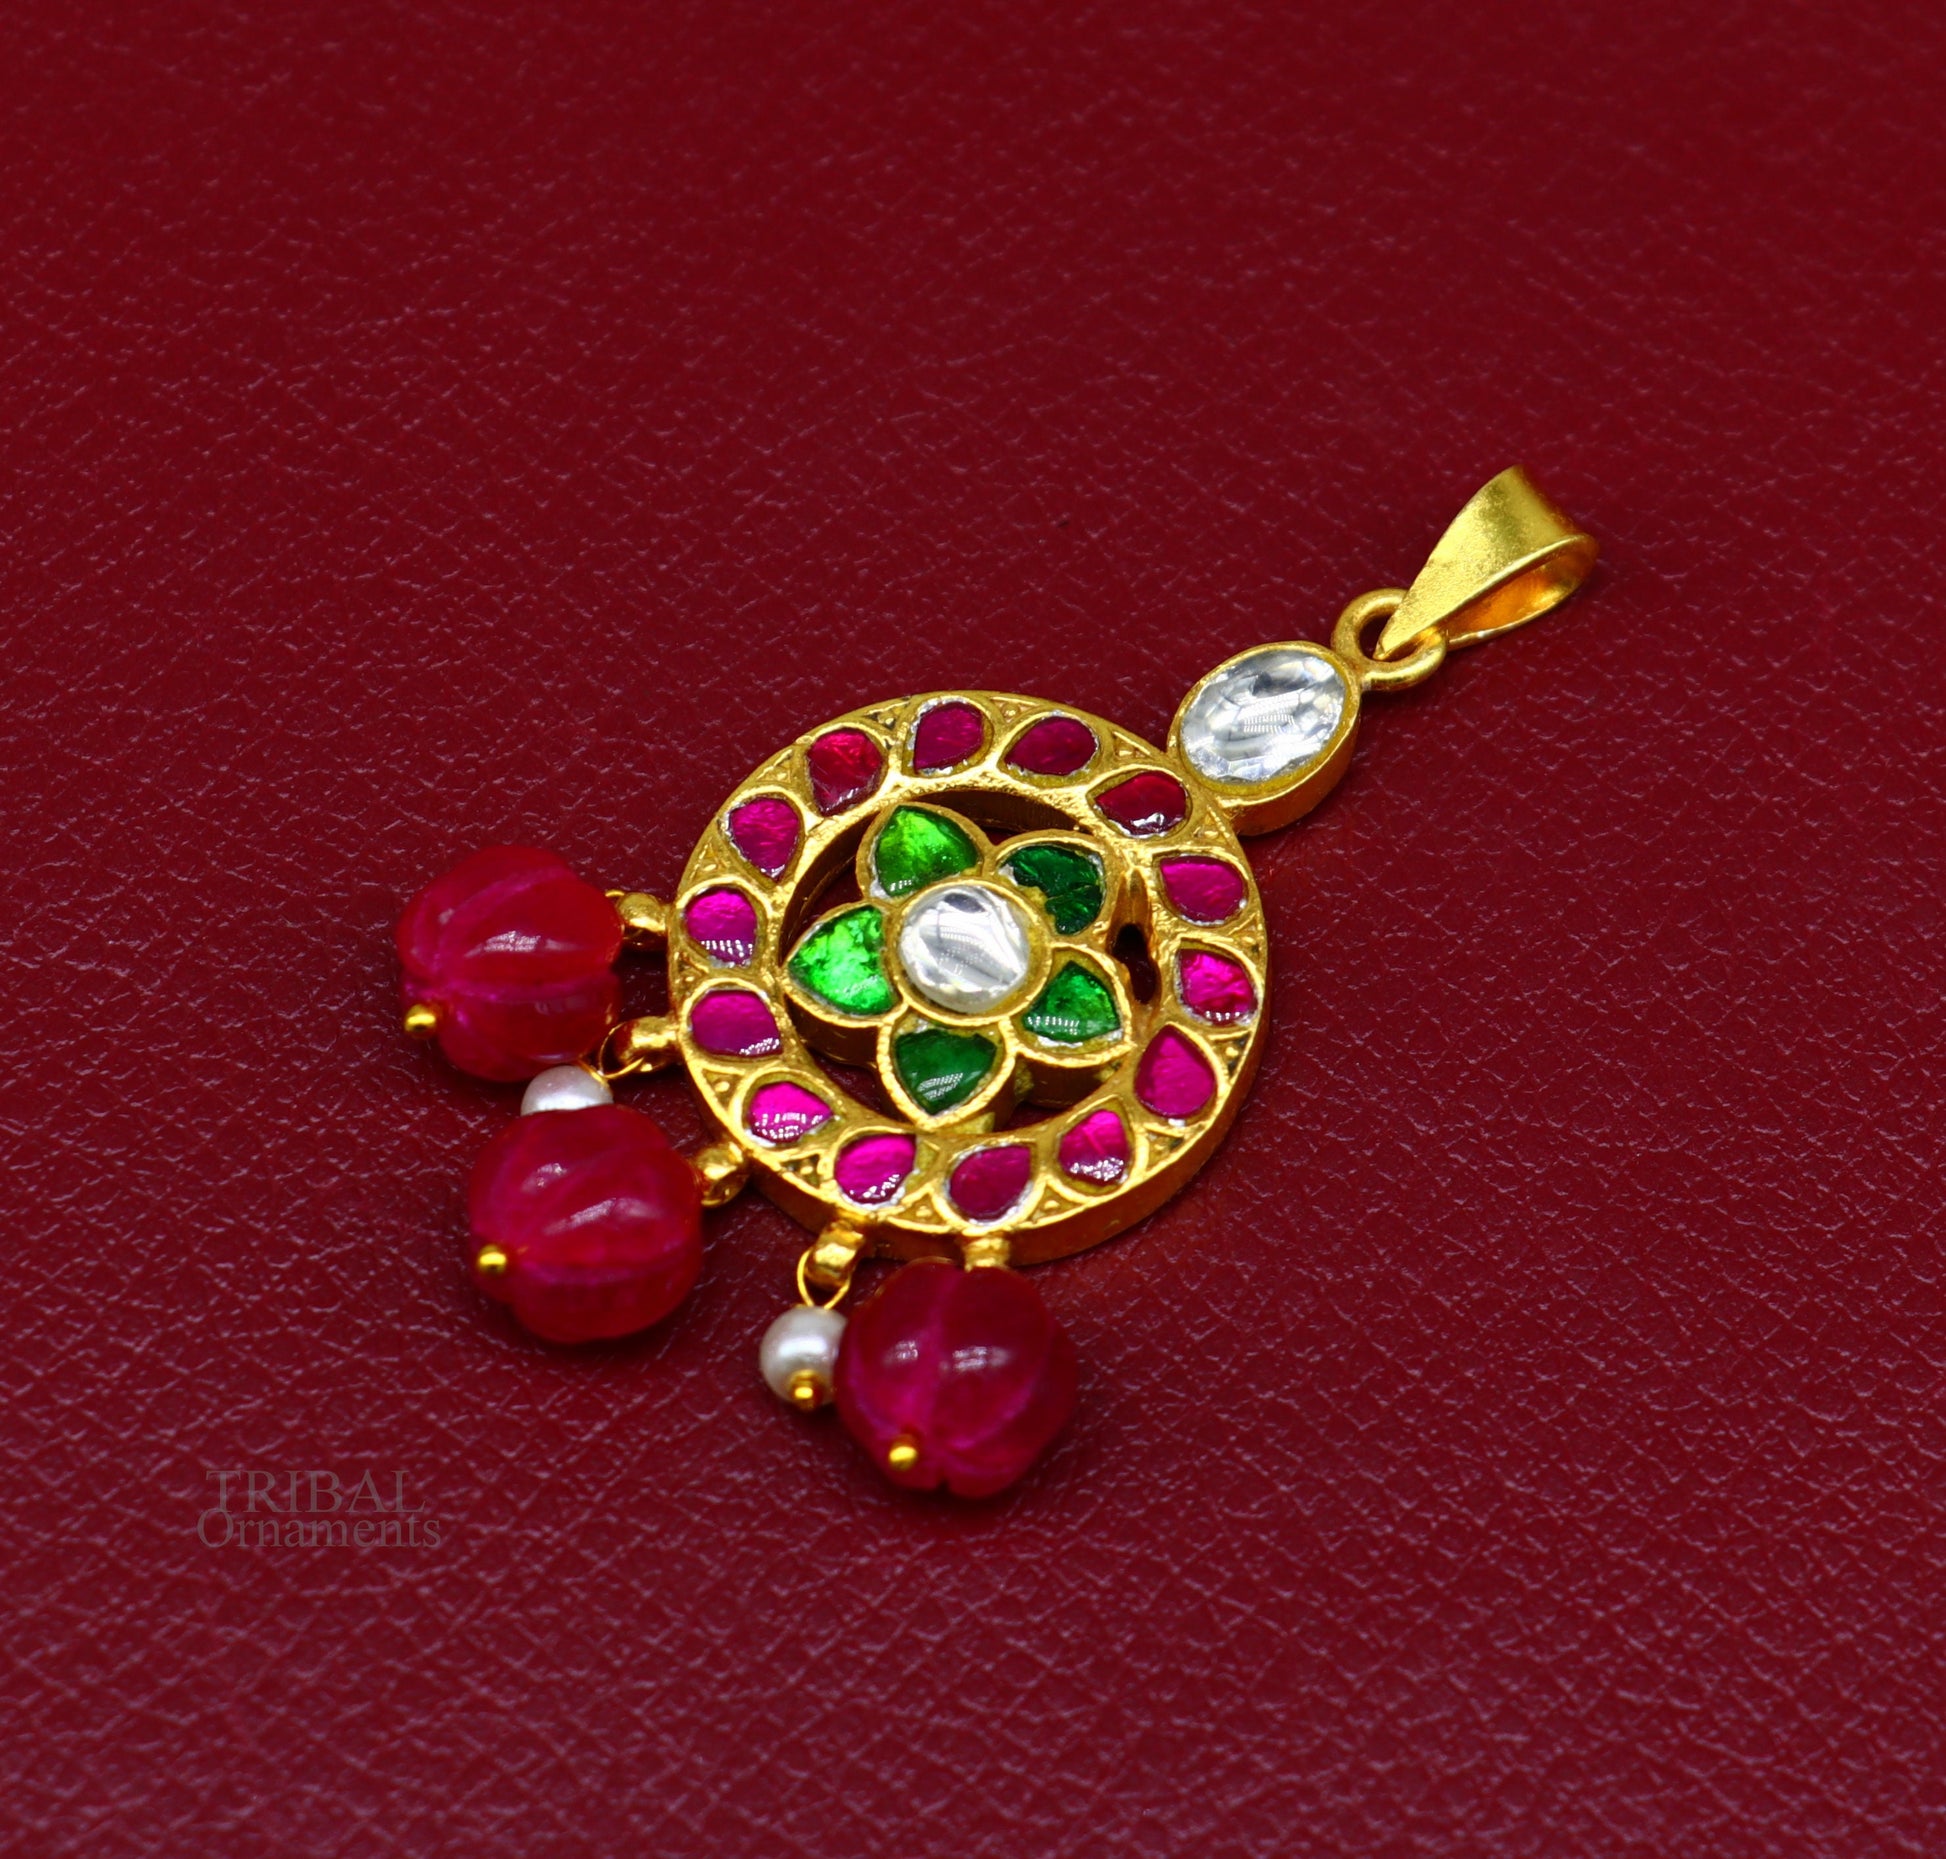 Exclusive gold polished or plated over 925 sterling silver pendant, amazing stylish red green stone and hanging pearl pendant nsp452 - TRIBAL ORNAMENTS